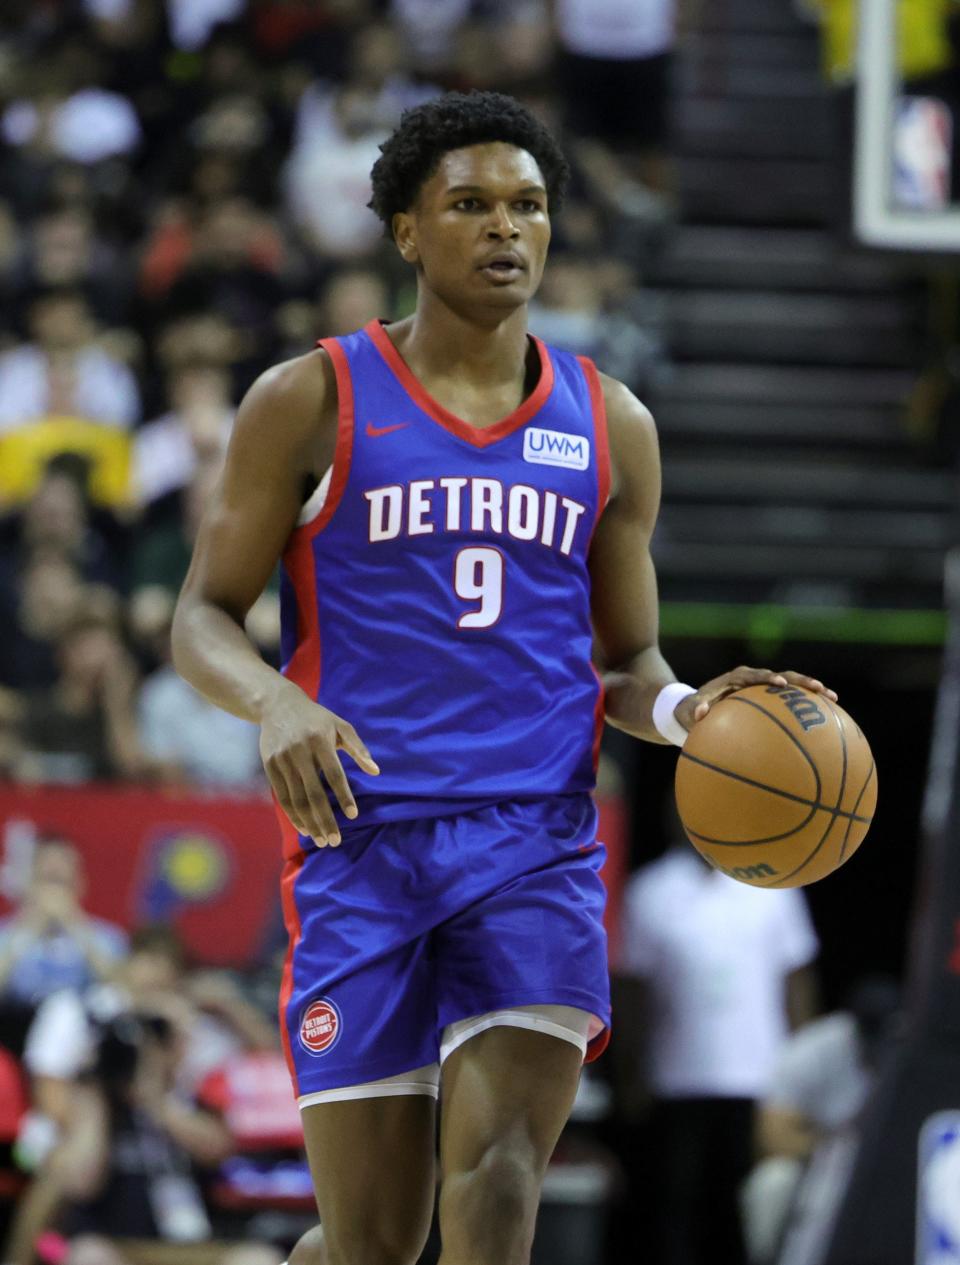 Pistons forward Ausar Thompson brings the ball up the court in the second half of the 133-101 loss to the Rockets in the NBA Summer League on Sunday, July 9, 2023, in Las Vegas.